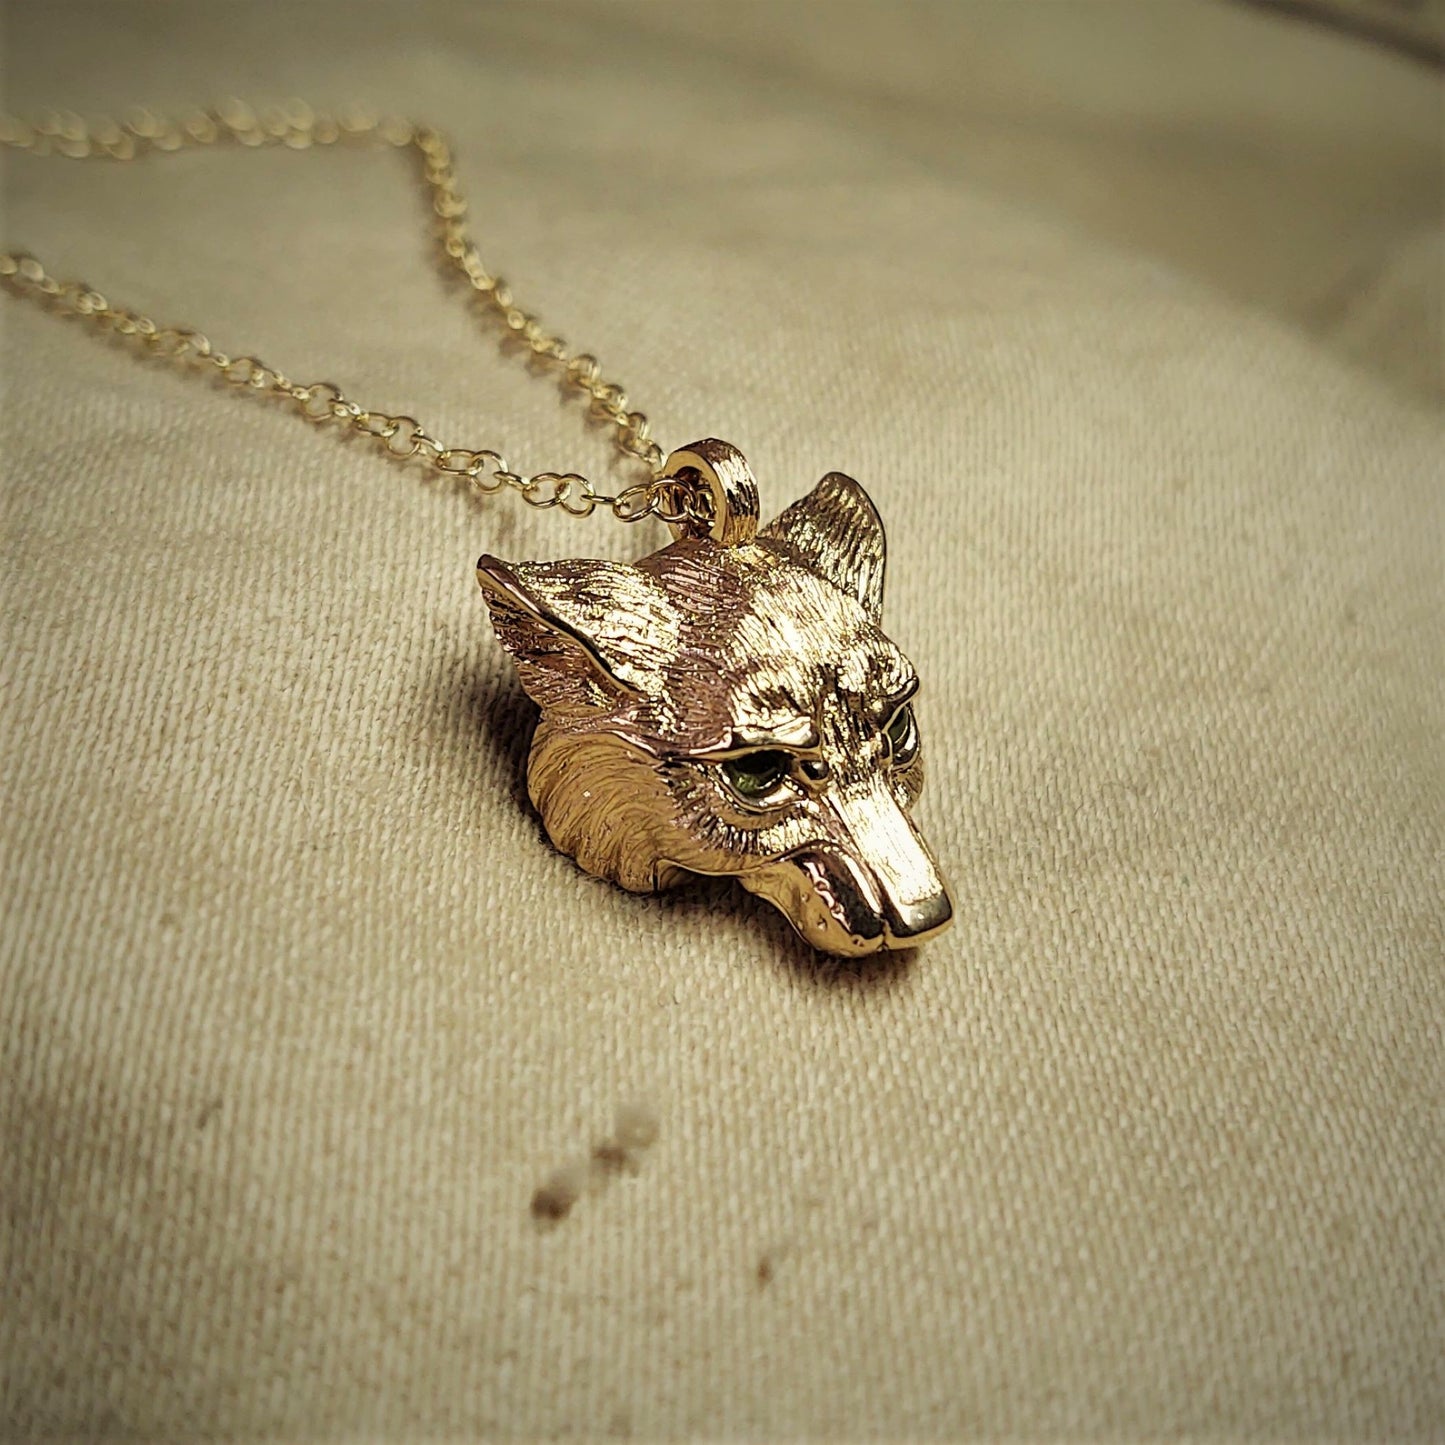 Gold wolf Necklace, Wolf's head pendant with natural peridot gemstone eyes, solid gold chain. Hand made to order. © Adrian Ashley